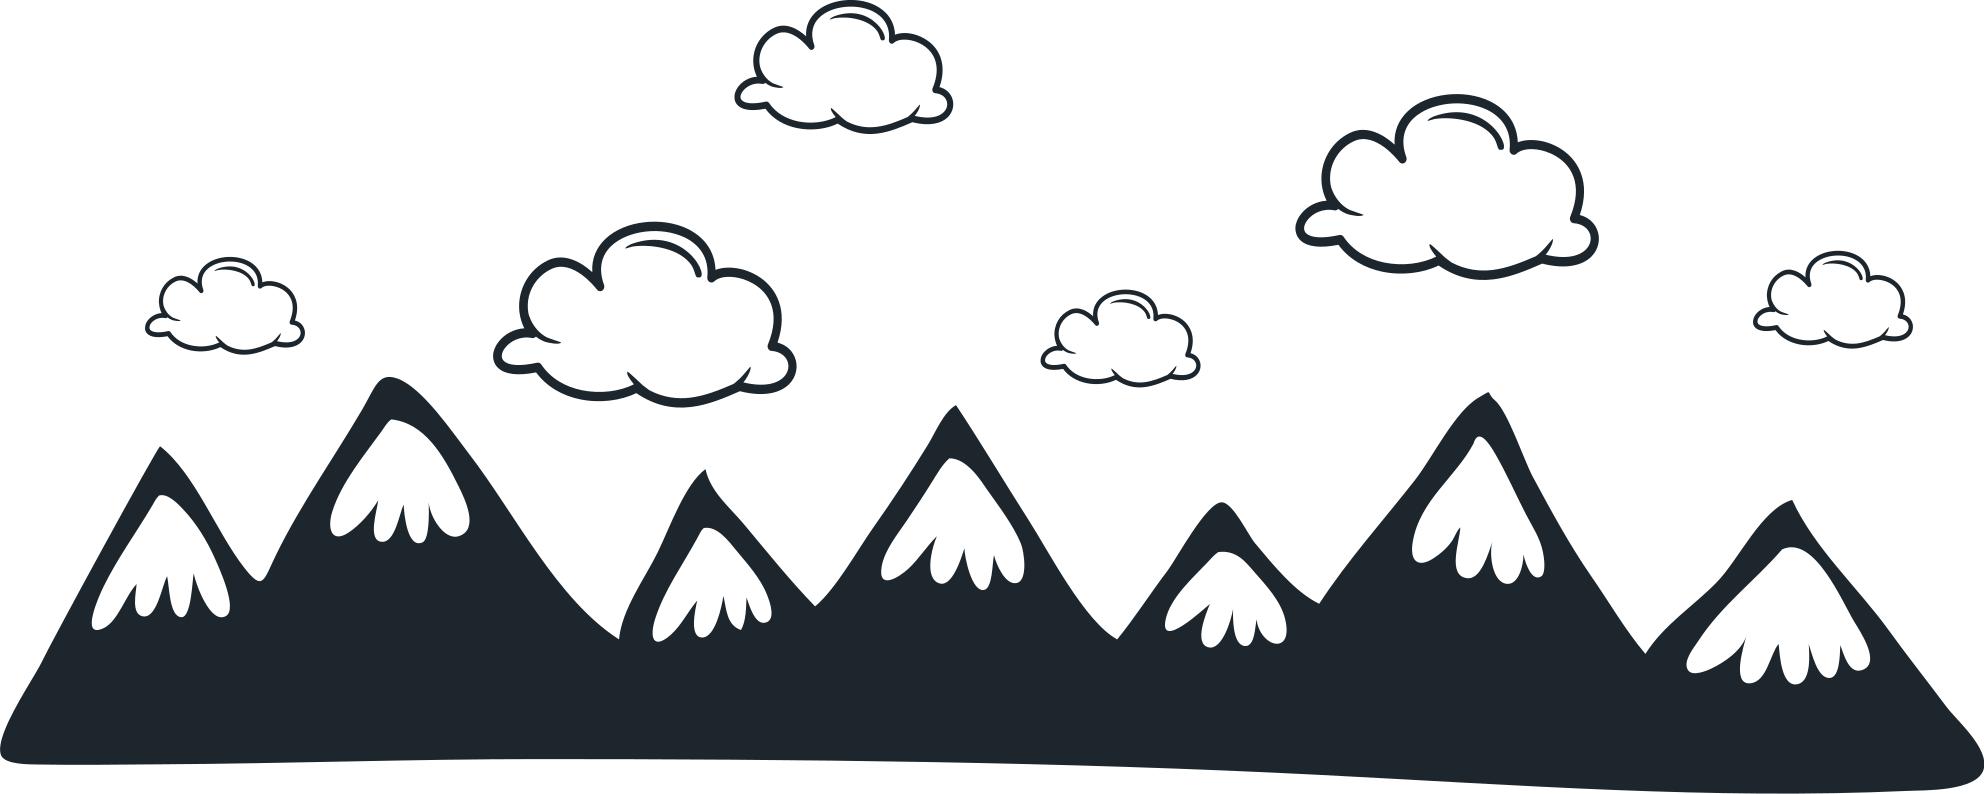 Hand drawn mountains with clouds nature decal - TenStickers